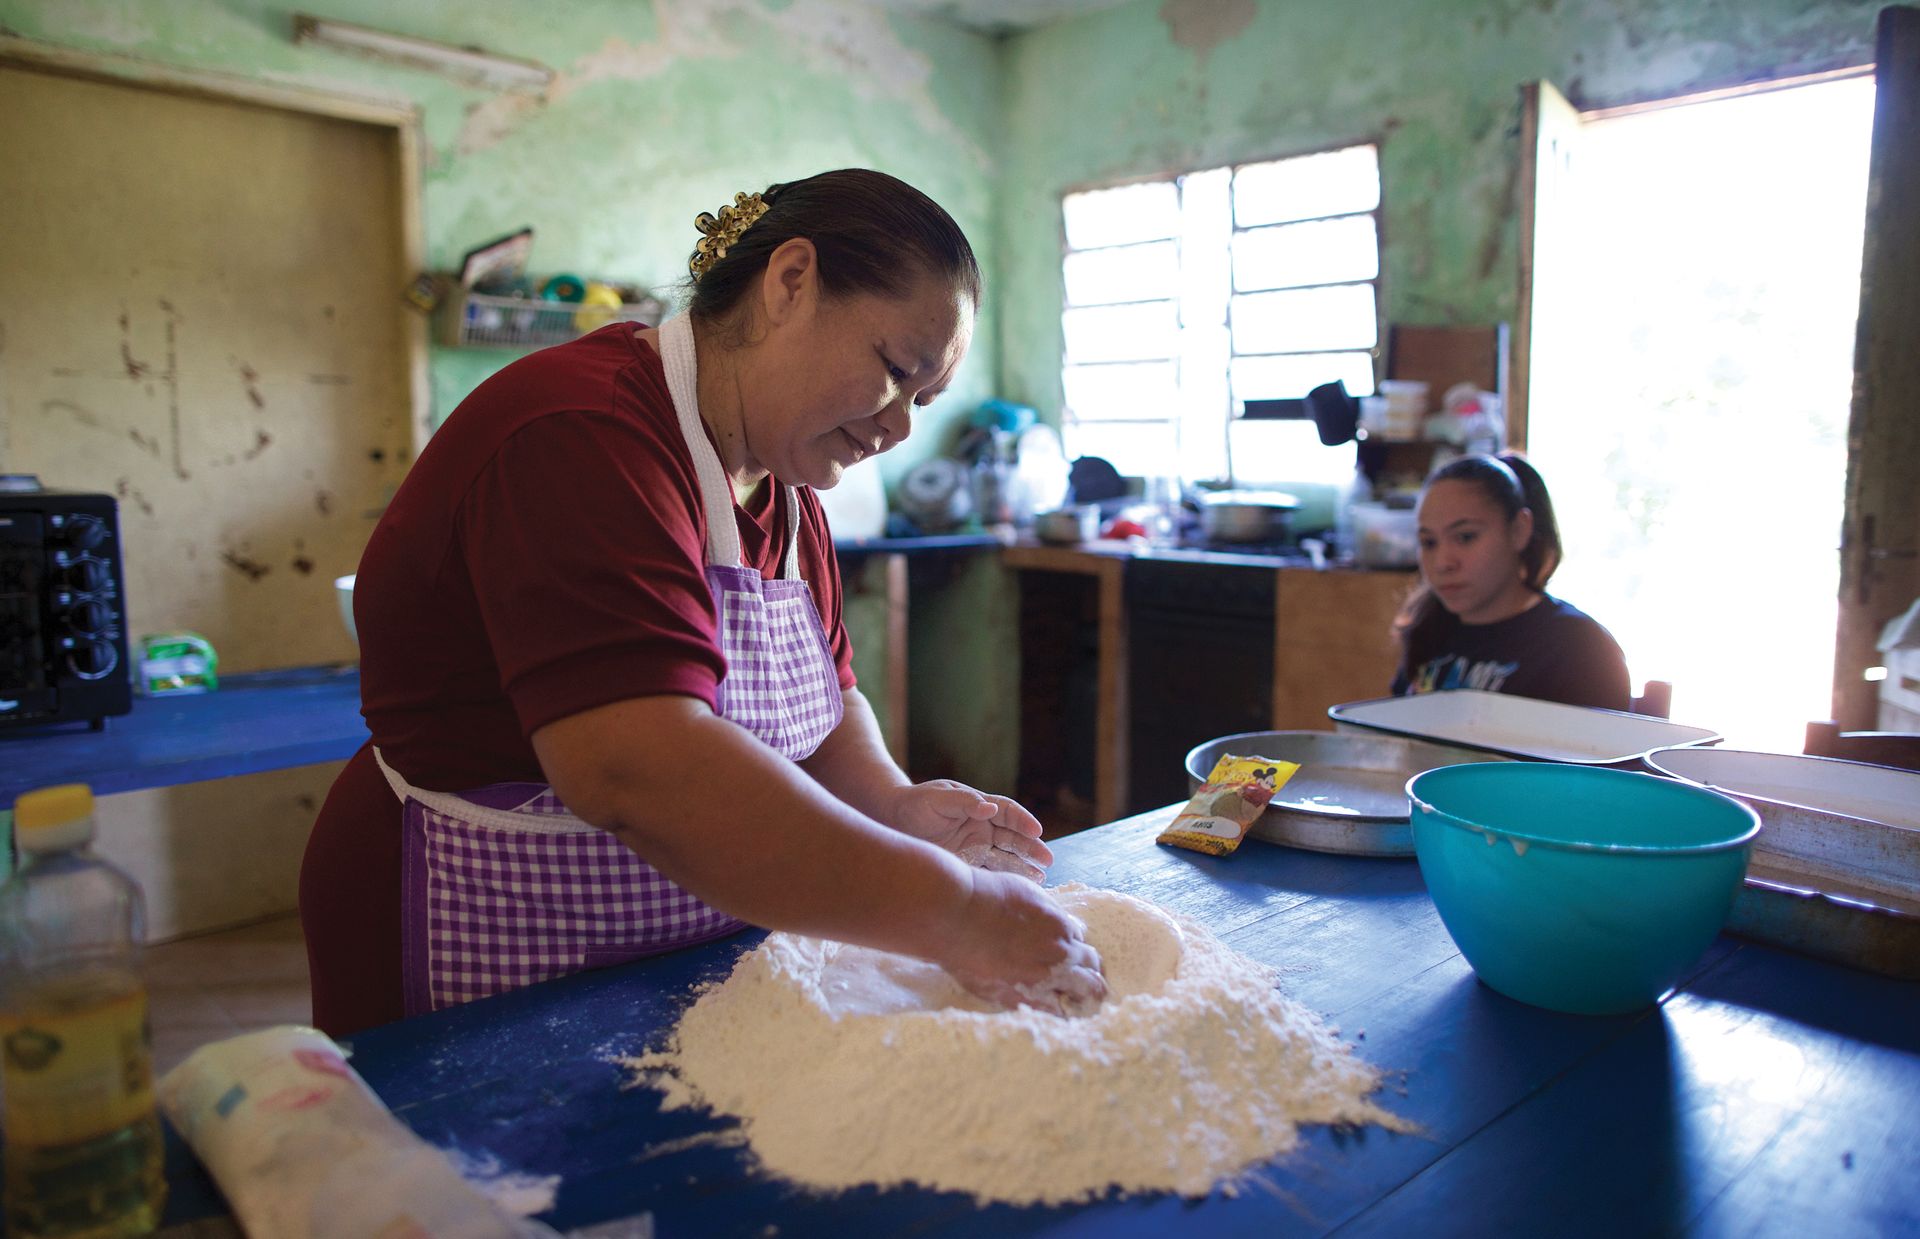 Struggling to make ends meet, Adriana González took one of the Church’s self-reliance courses and decided that she could bake and sell bread.